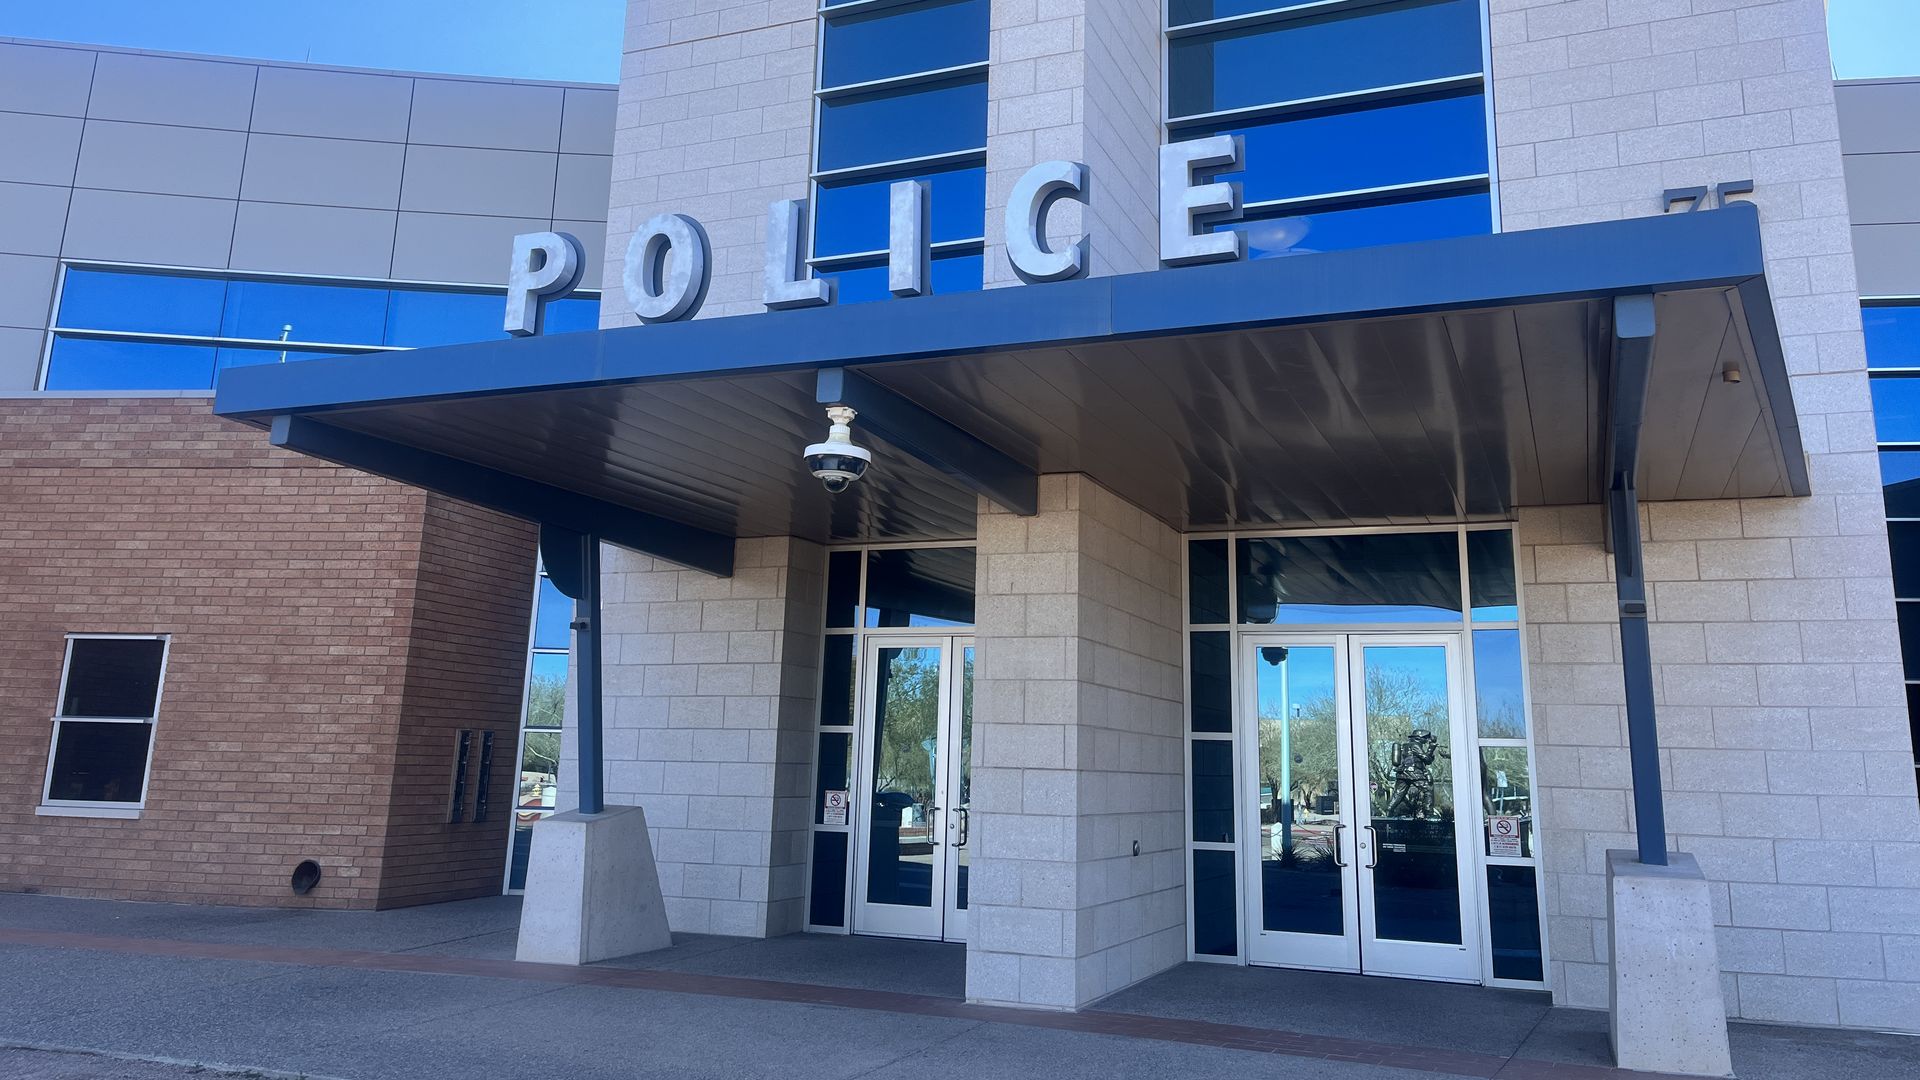 A building that says "Police."